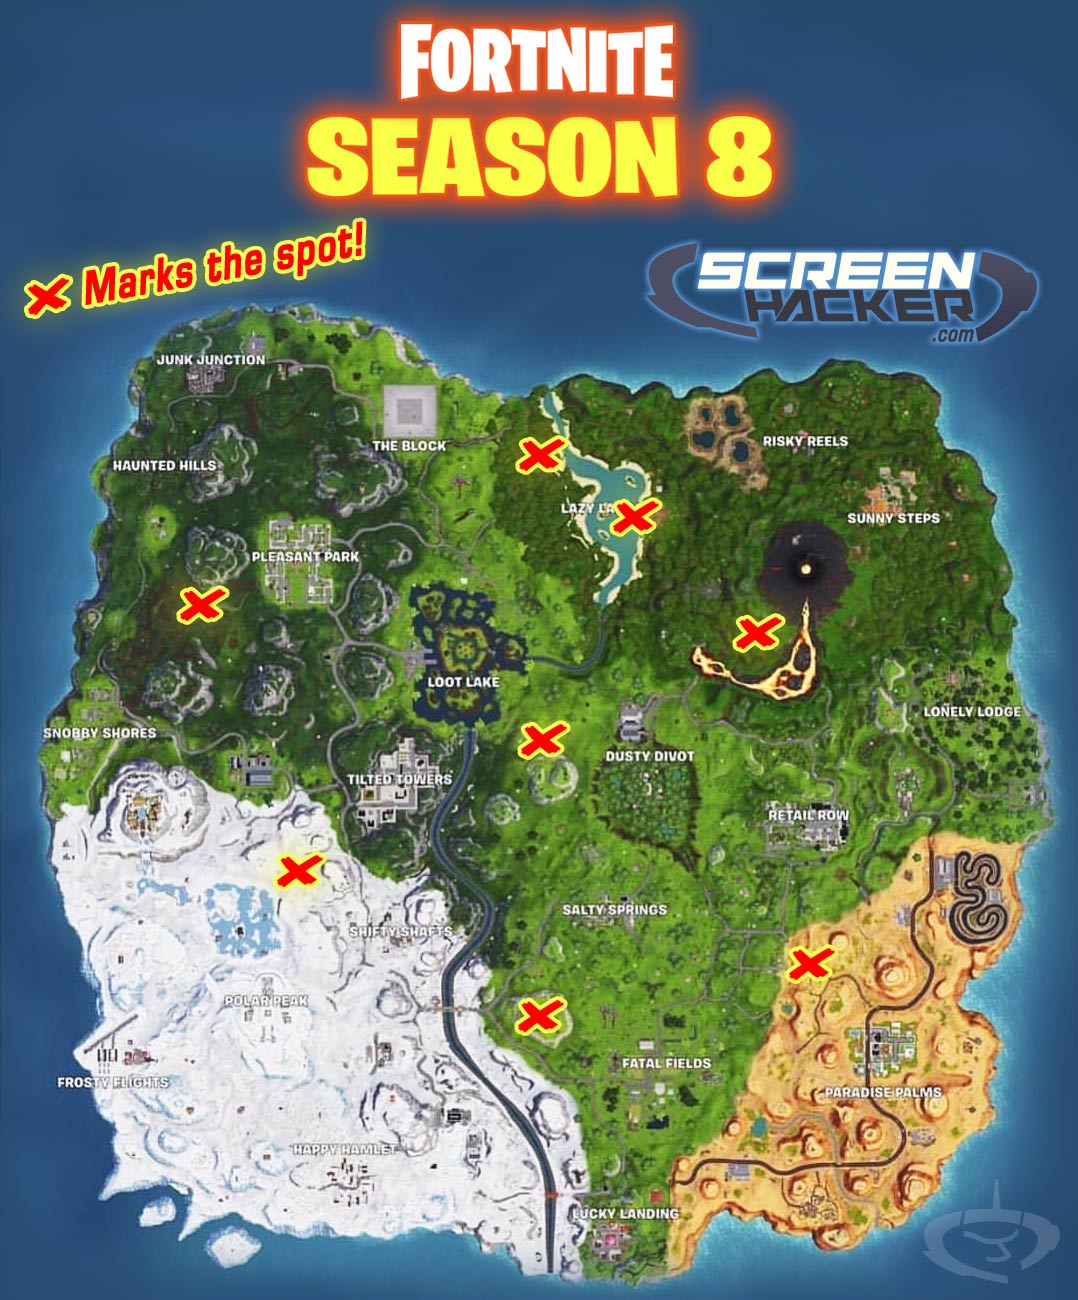 fortnite season 8 week 2 challenge deal damage to opponents with a pirate cannon - fortnite week 2 challenges cheat sheet season 8